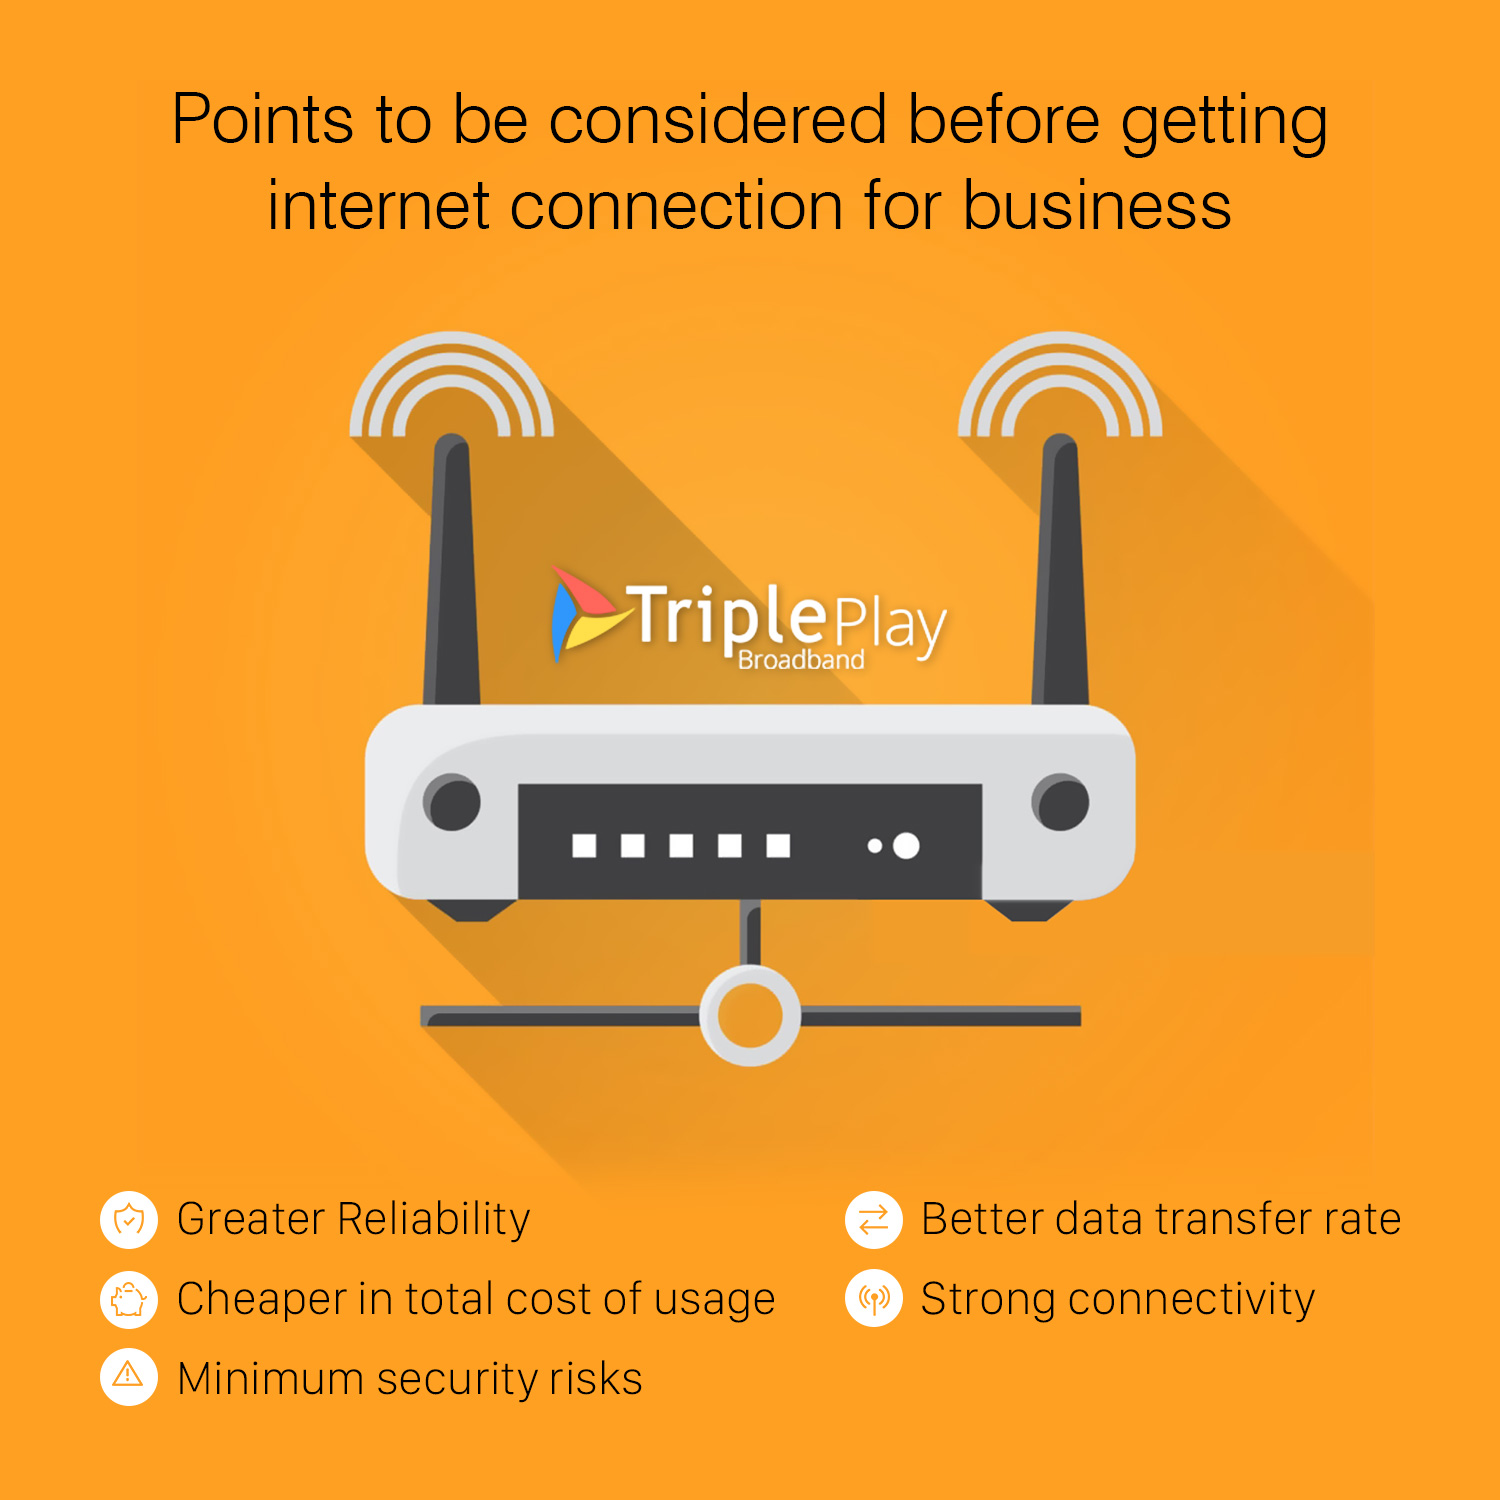 Points to be Considered Before Getting Internet Connection for Business